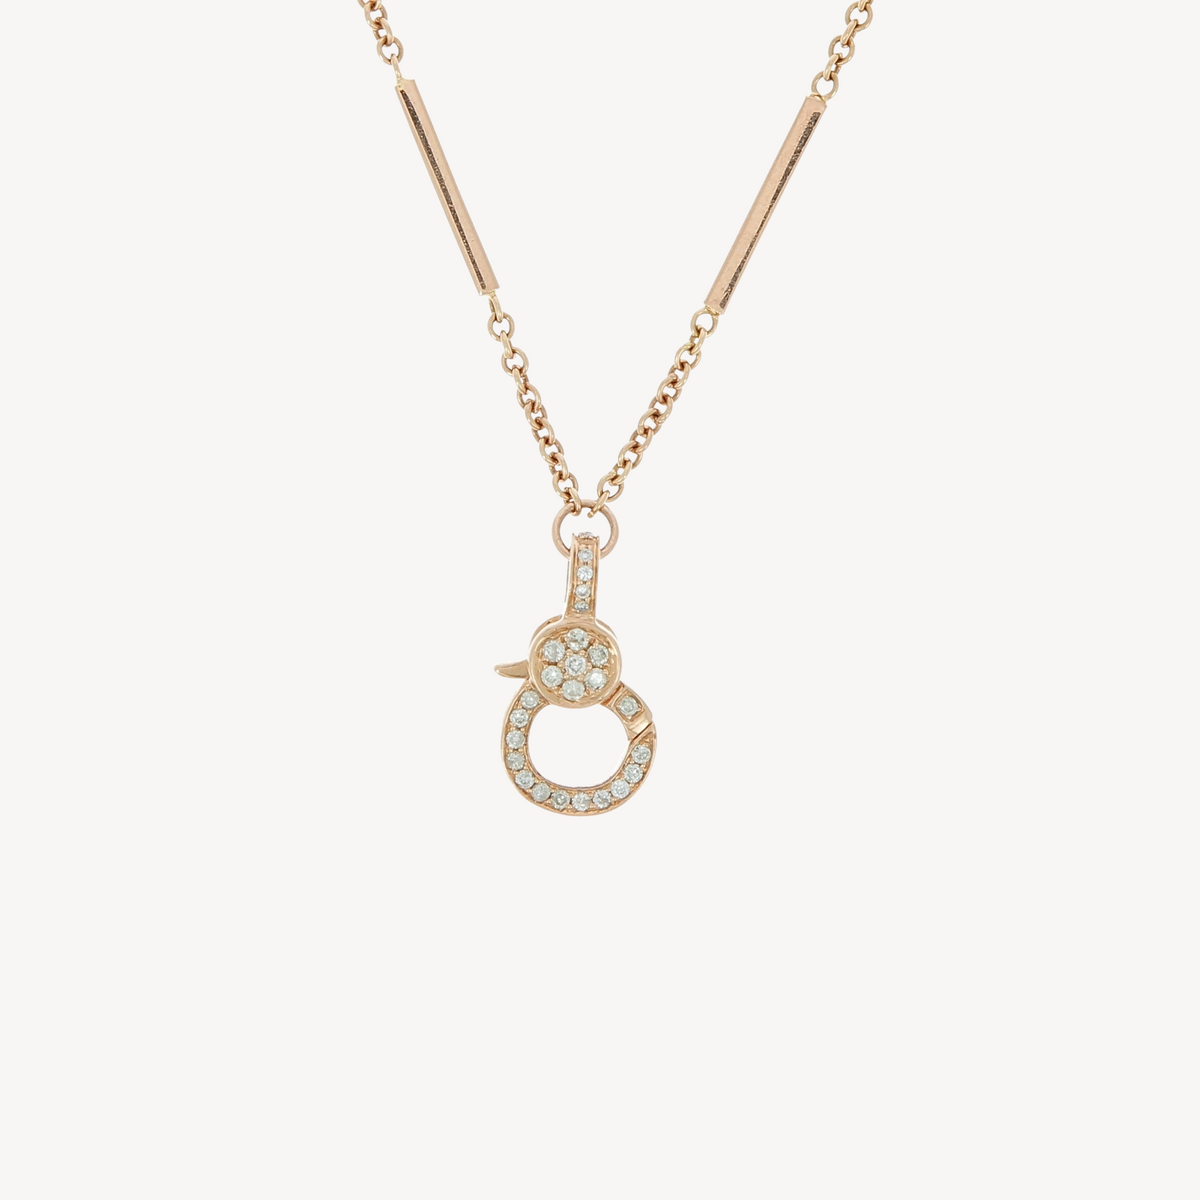 Rose gold 6 link mother of pearl charm necklace